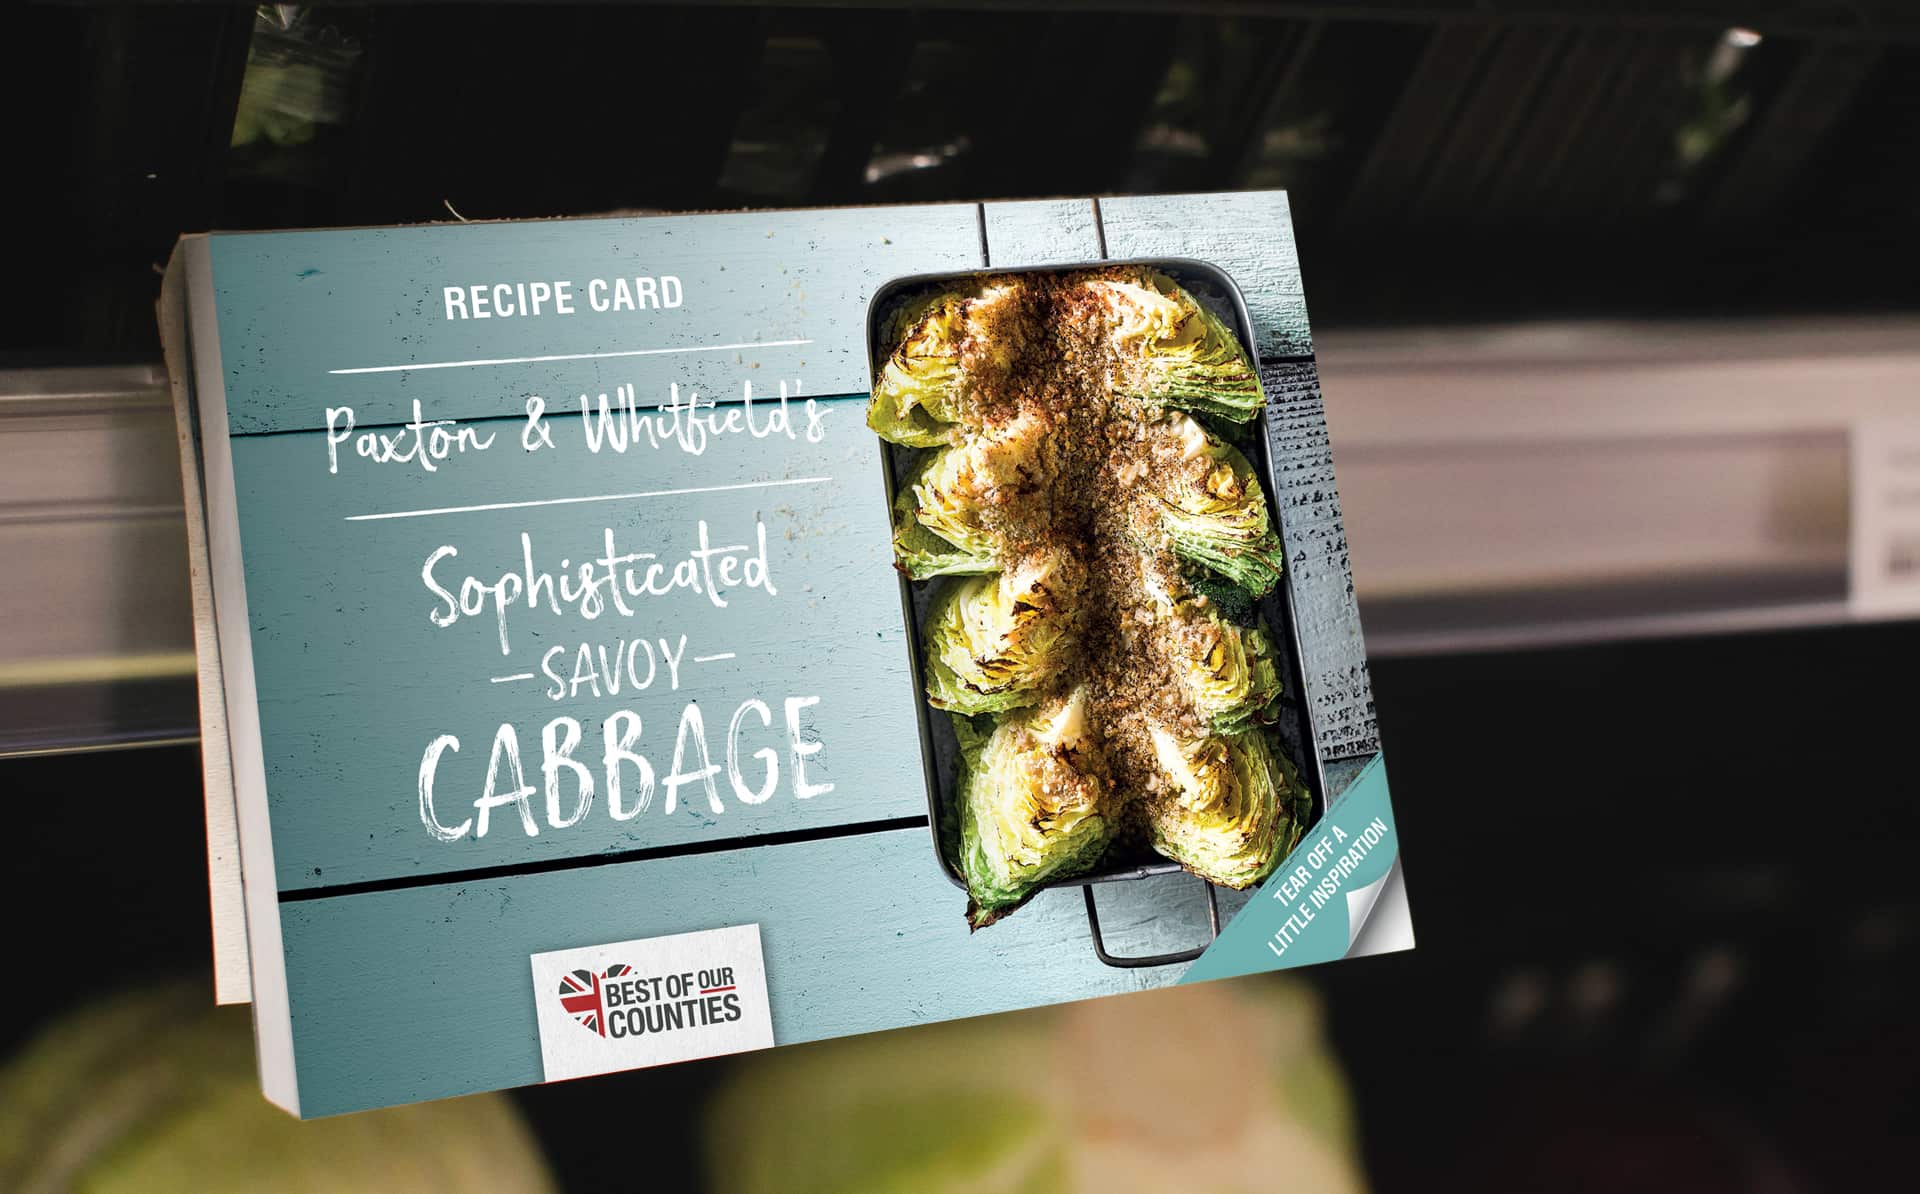 Retail trends: savoy cabbage tear-off POS (Point of sale) materials in retail marketing